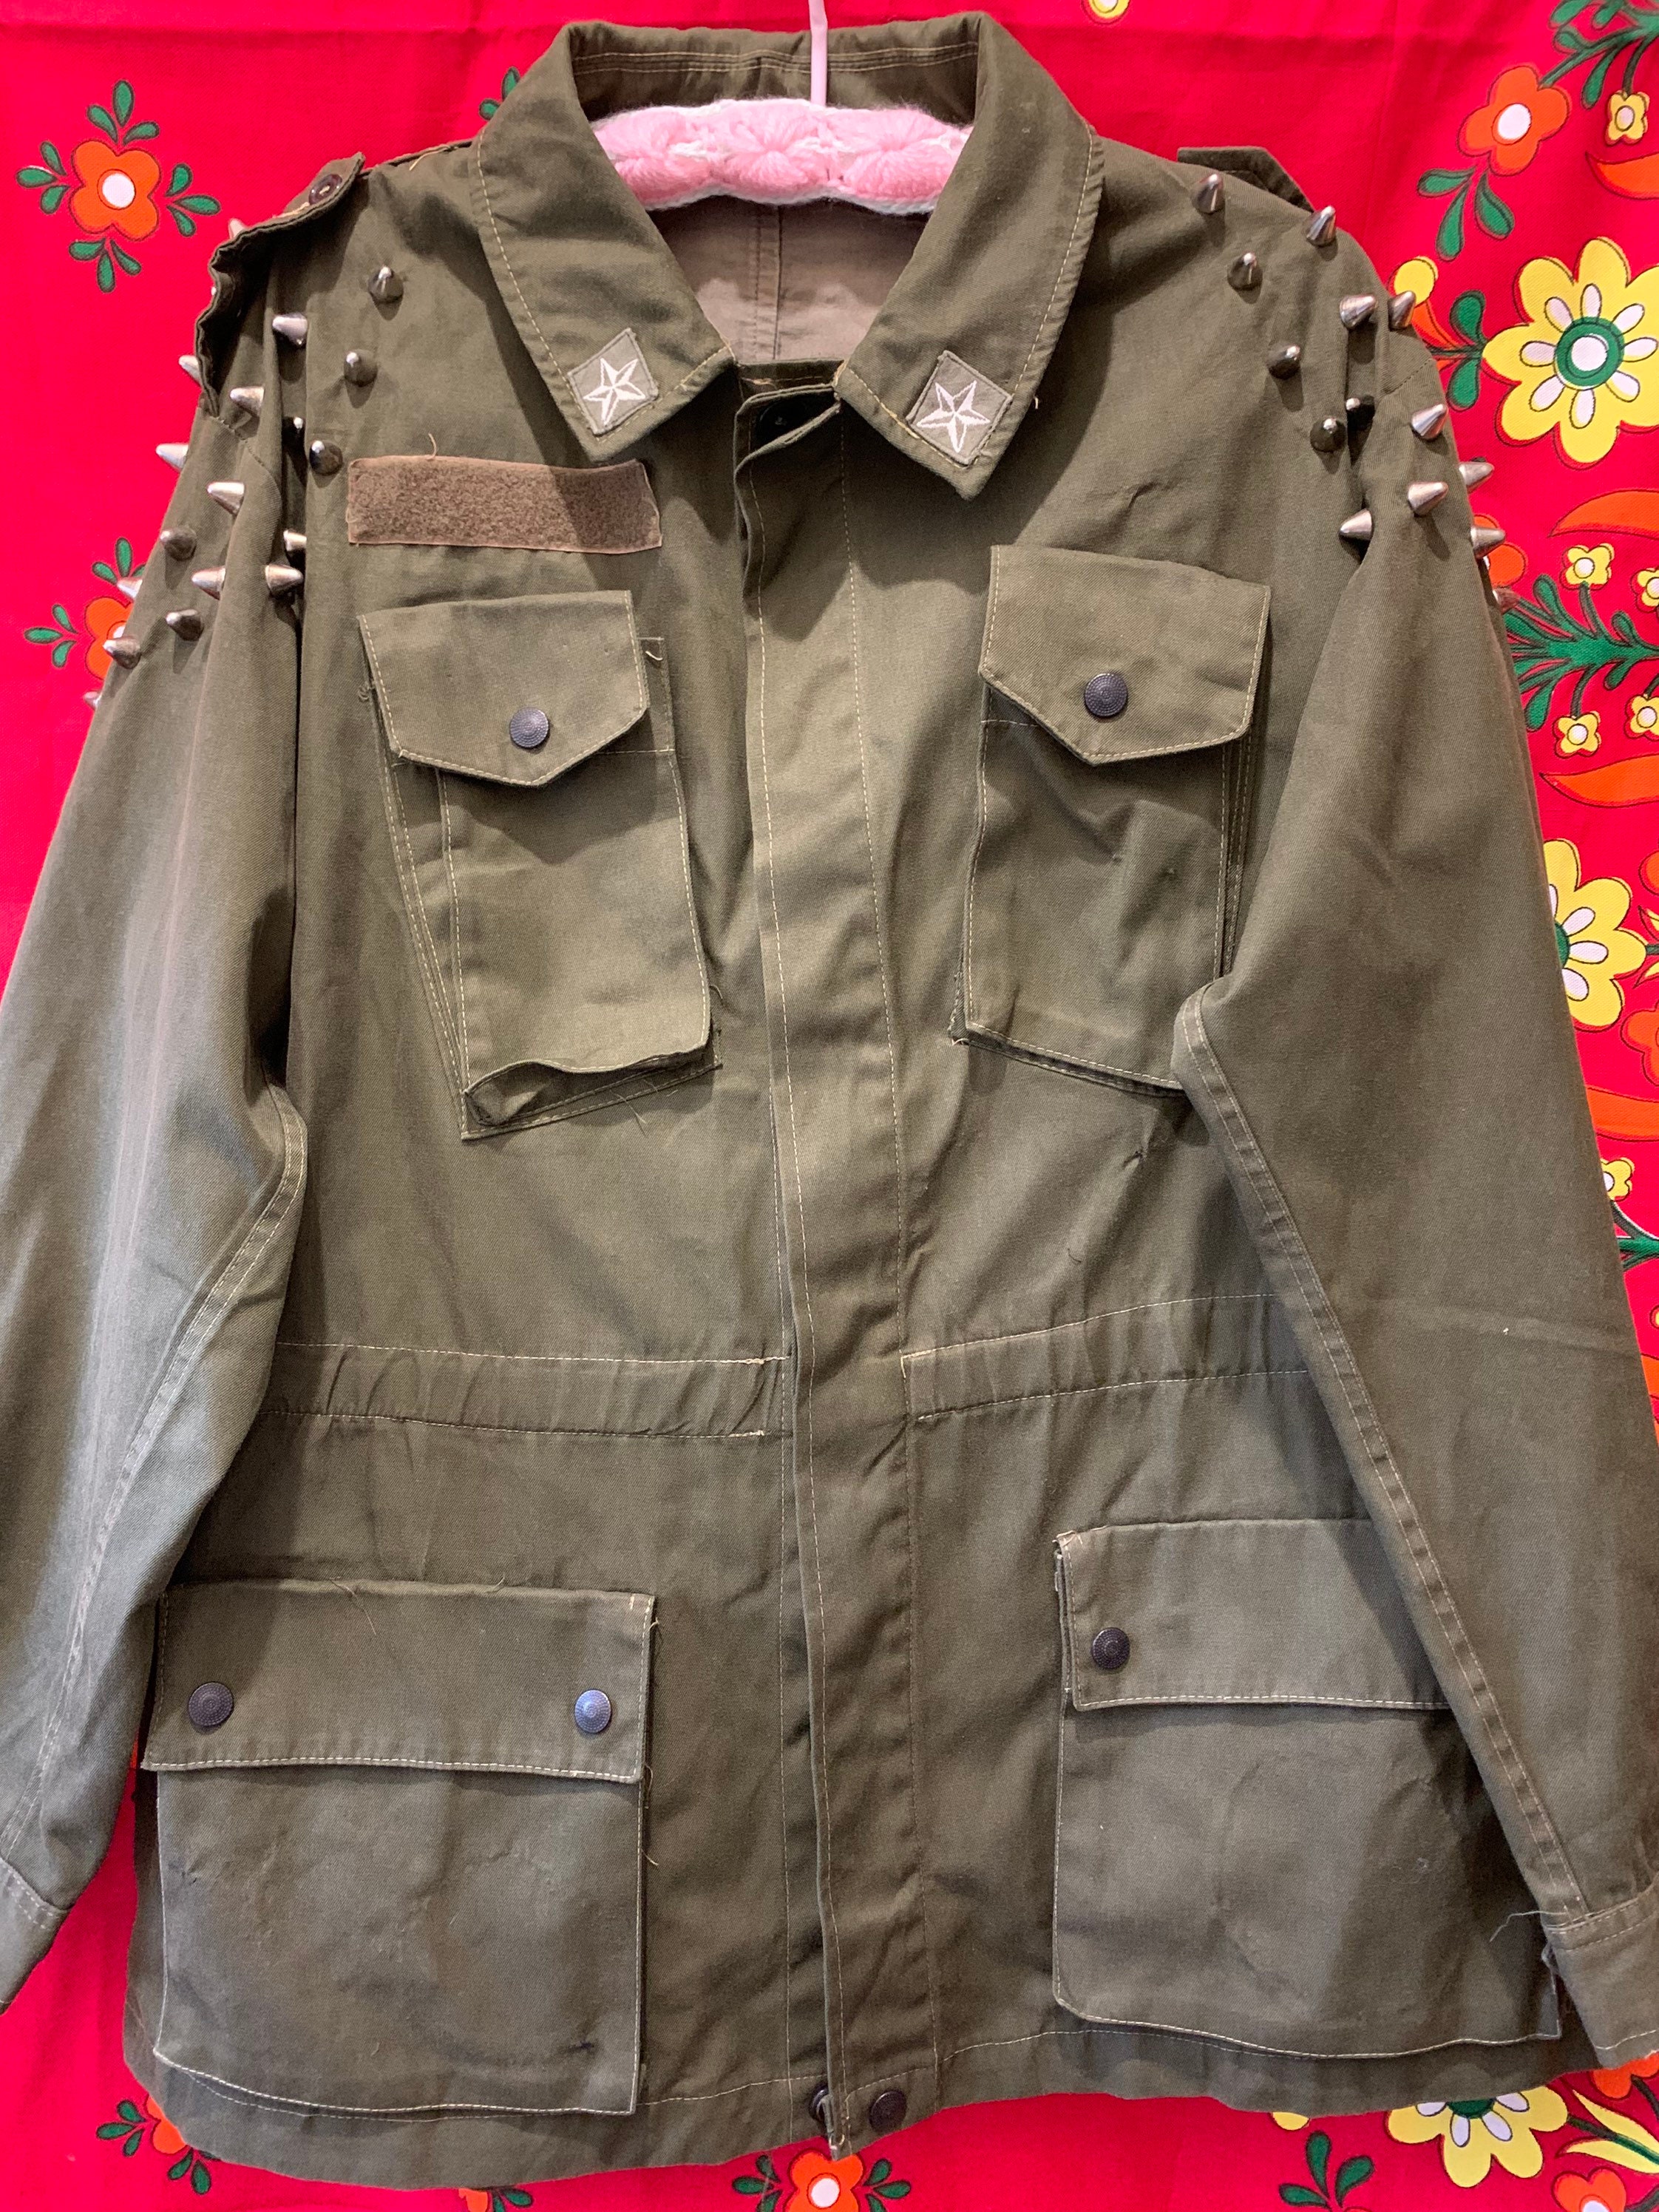 Upcycled Army Surplus Jacket With Studs - Etsy